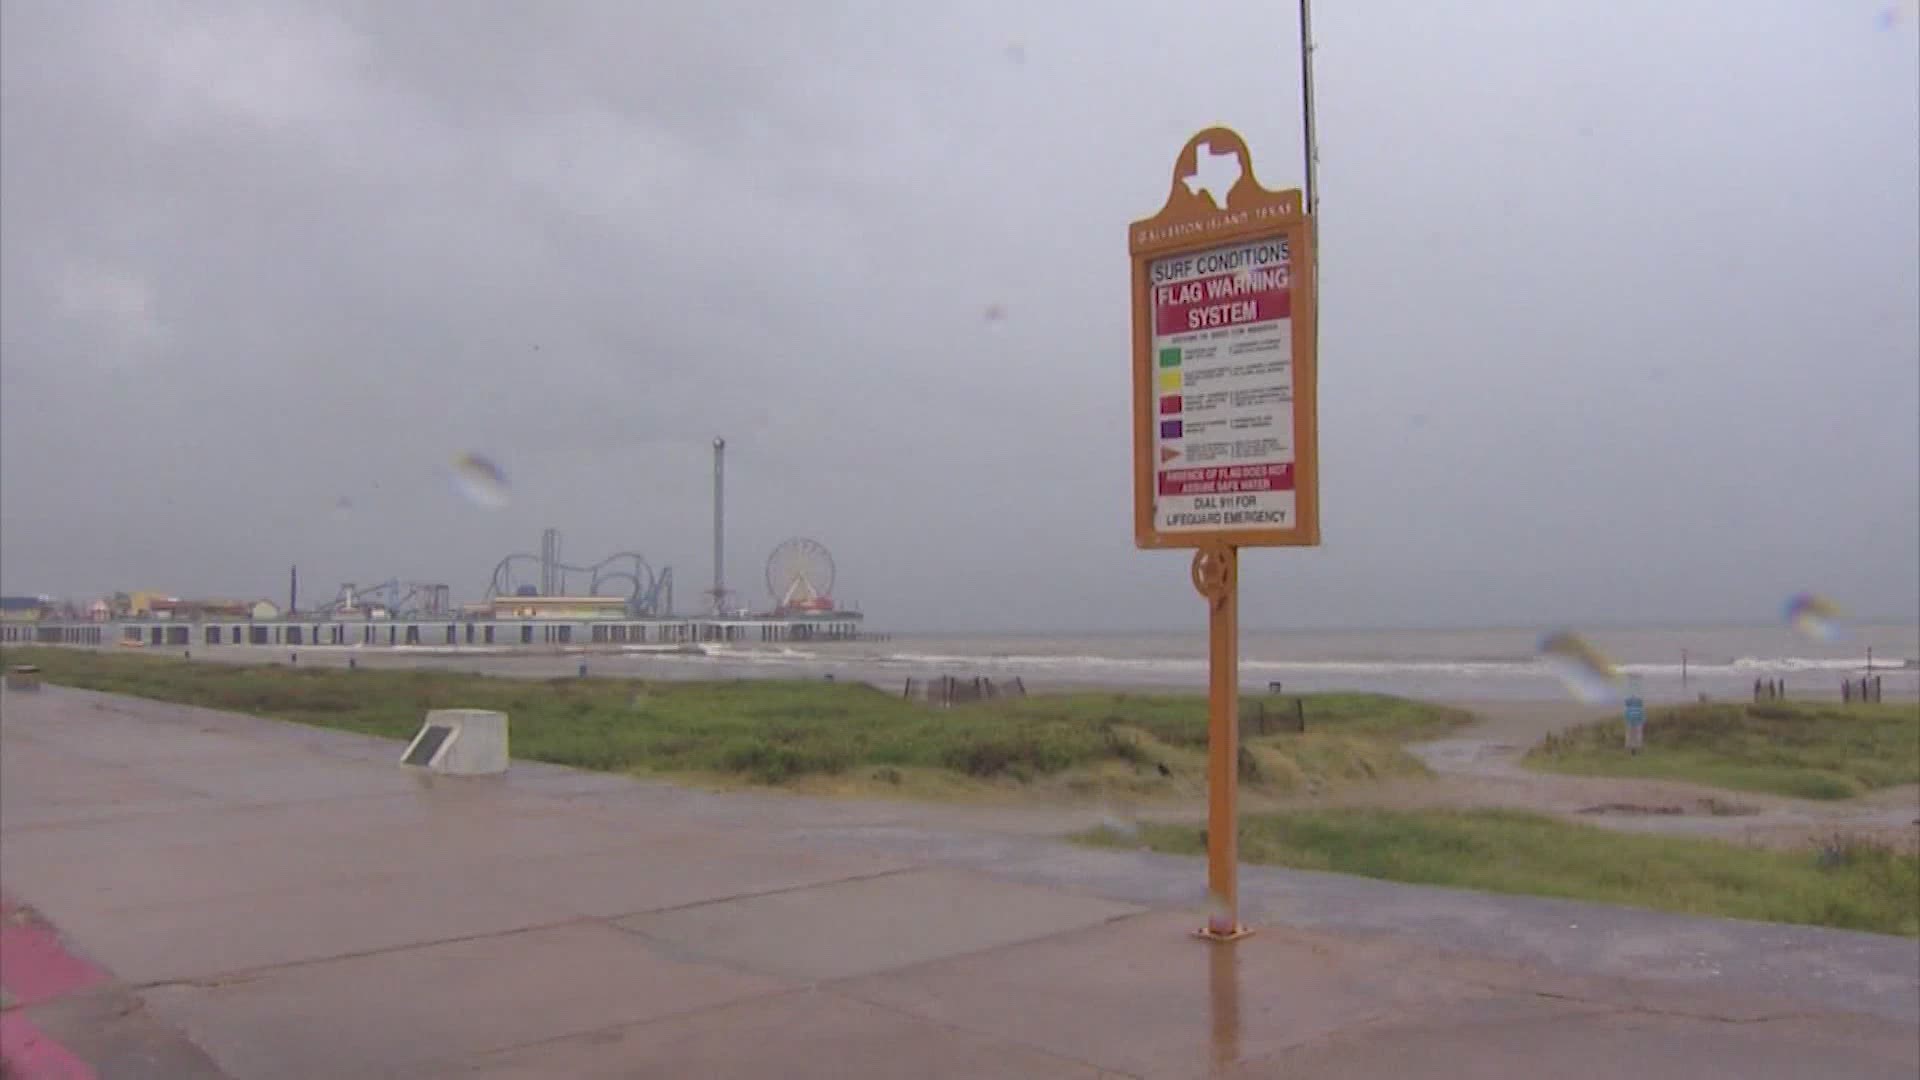 Galveston Beach Patrol has recovered the body of an 8-year-old boy who drowned Wednesday after it is believed he got caught in a rip current.